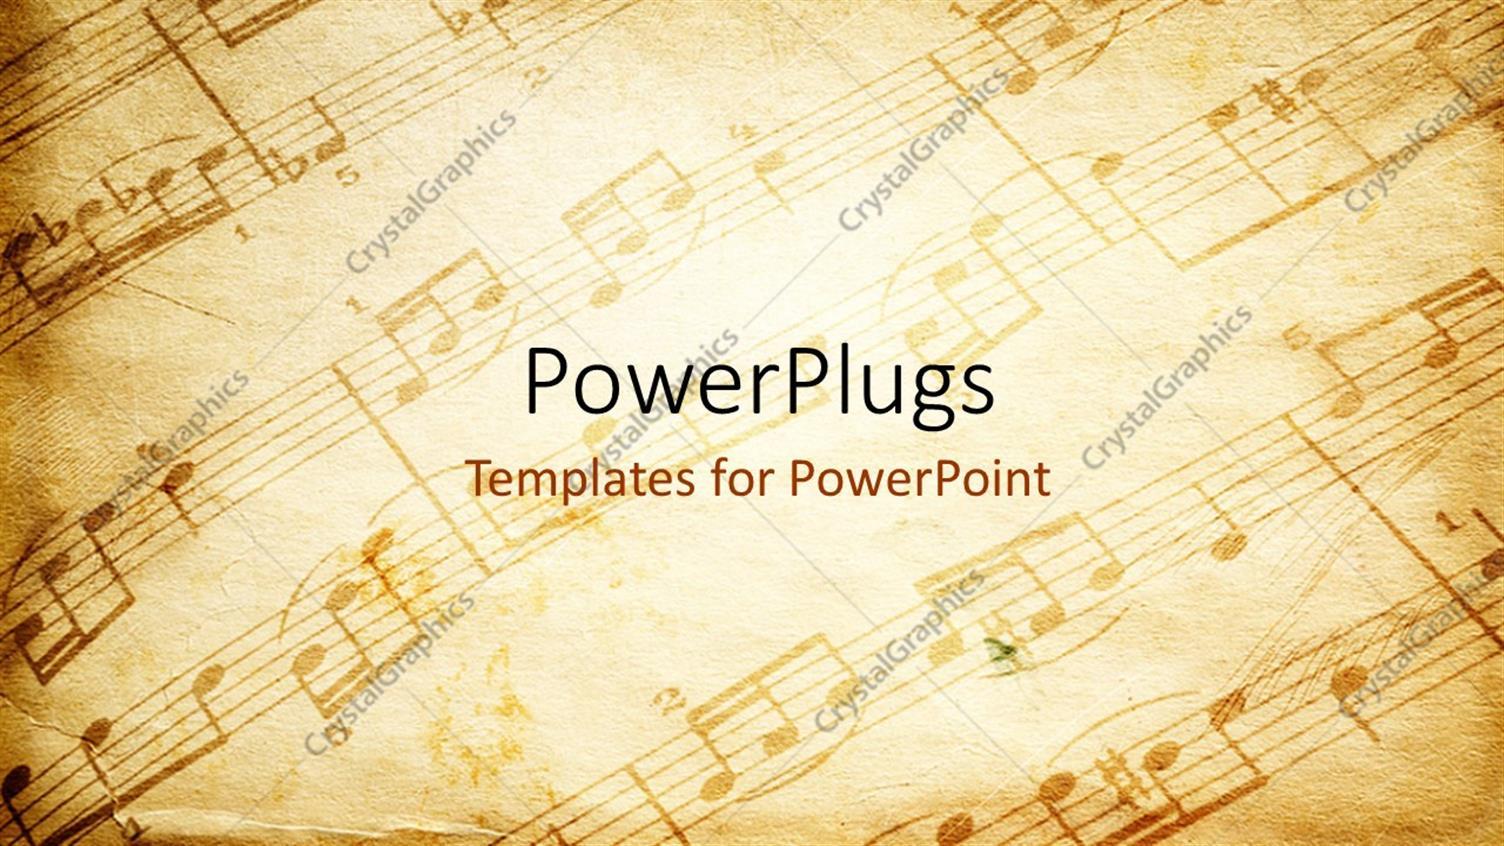 PowerPoint, vintage paper background depicting music sheet